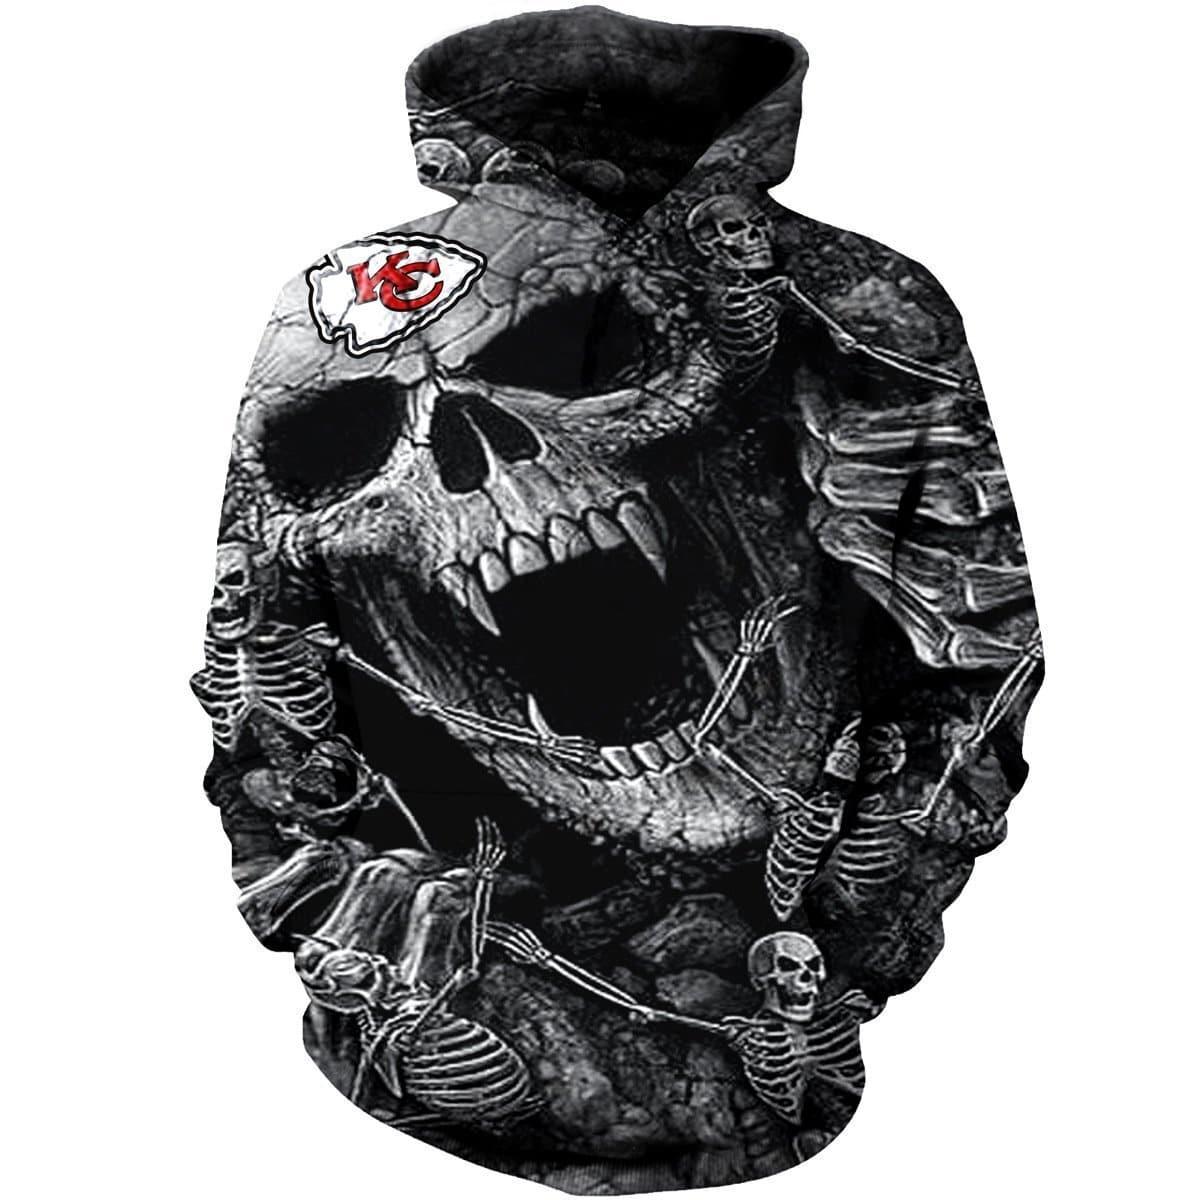 kansas city chiefs limited edition all over print hoodie zip hoodie size s 5xl gts002580 nhl98